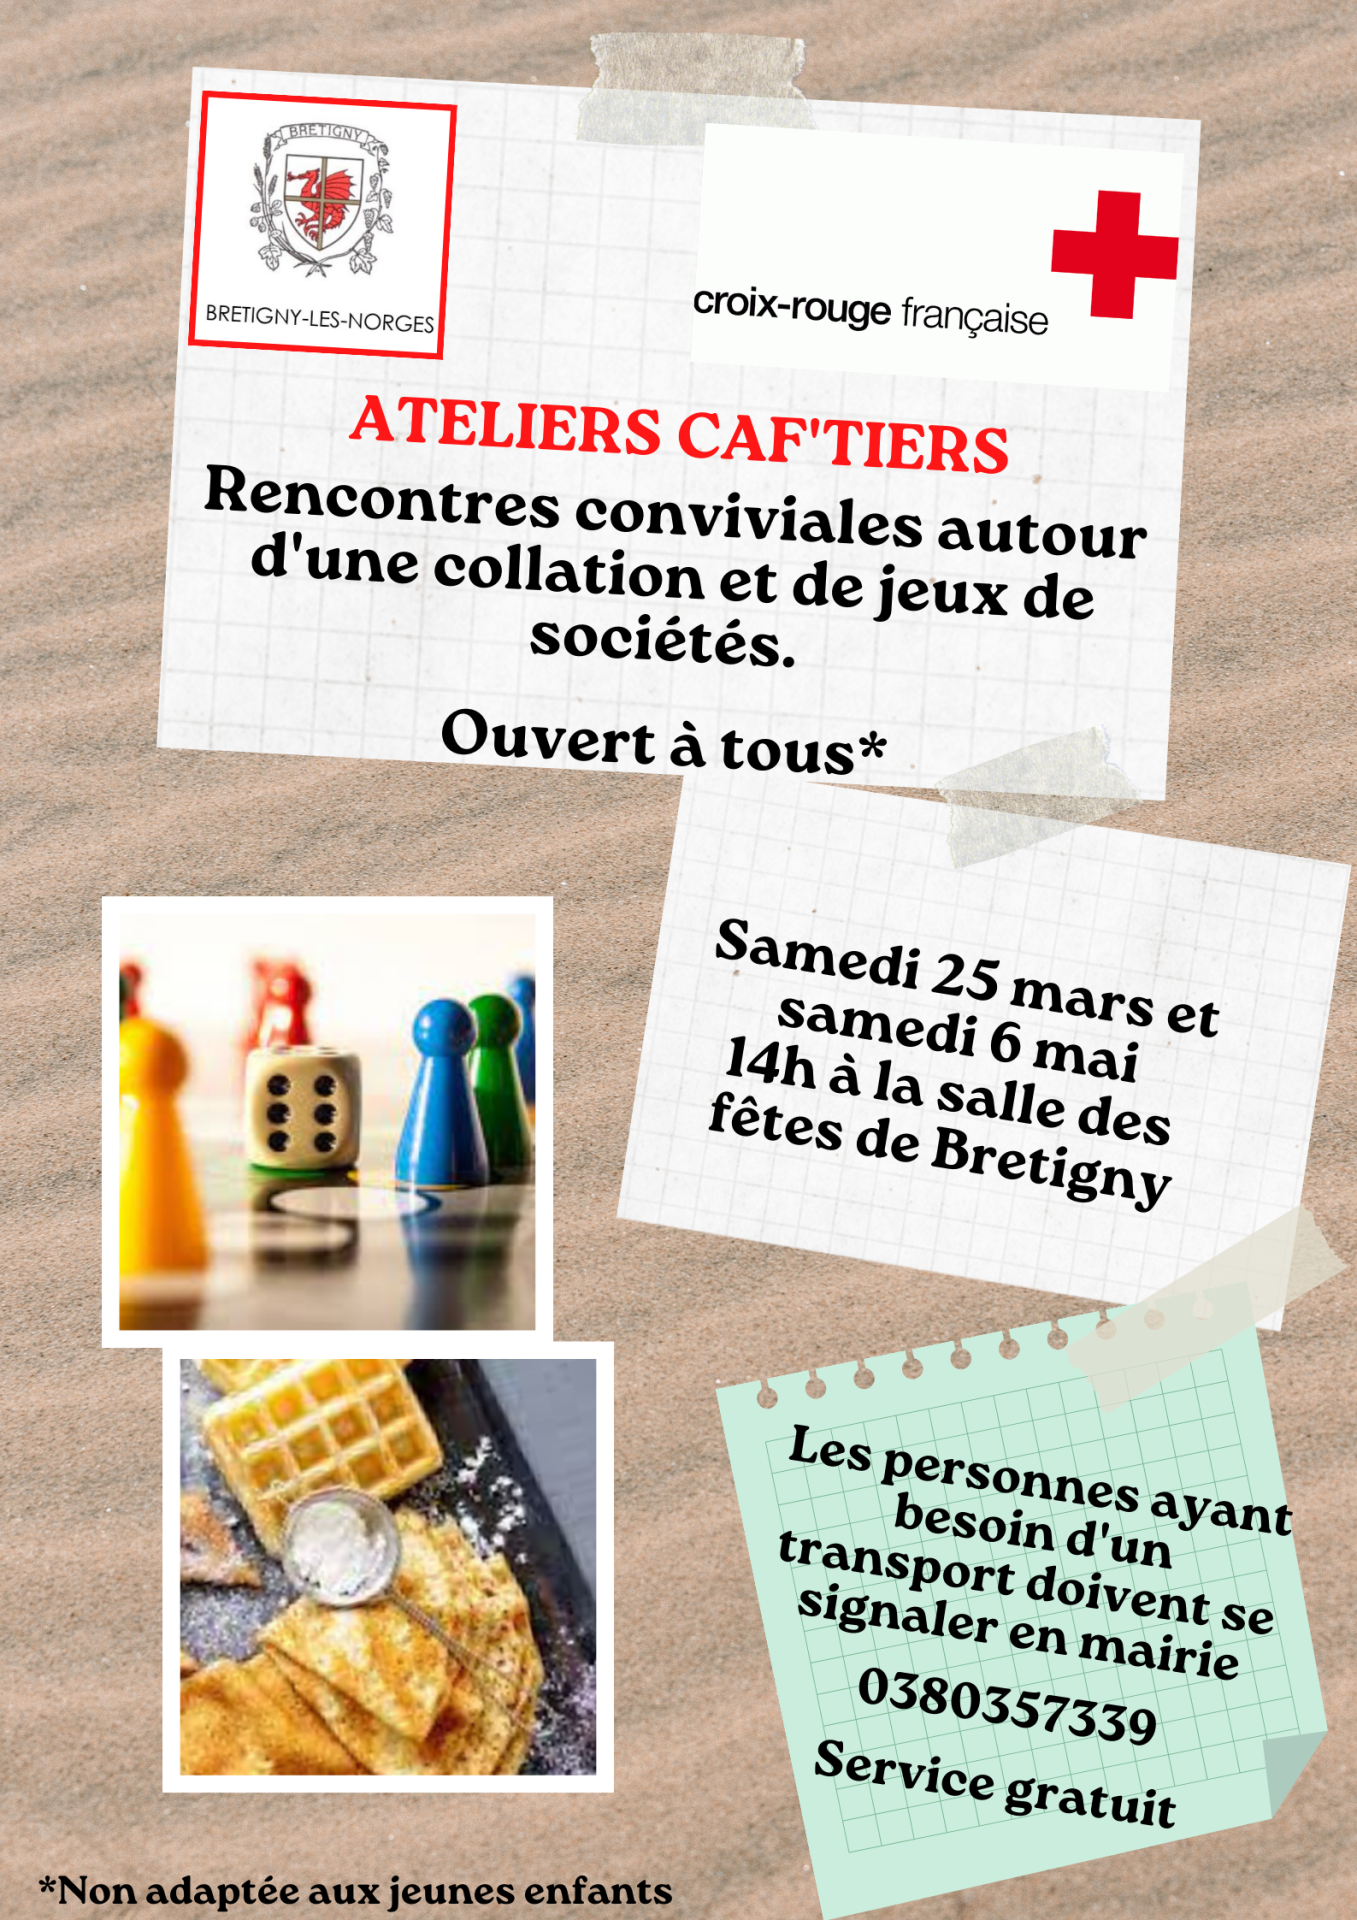 Atelier Caf'Tiers